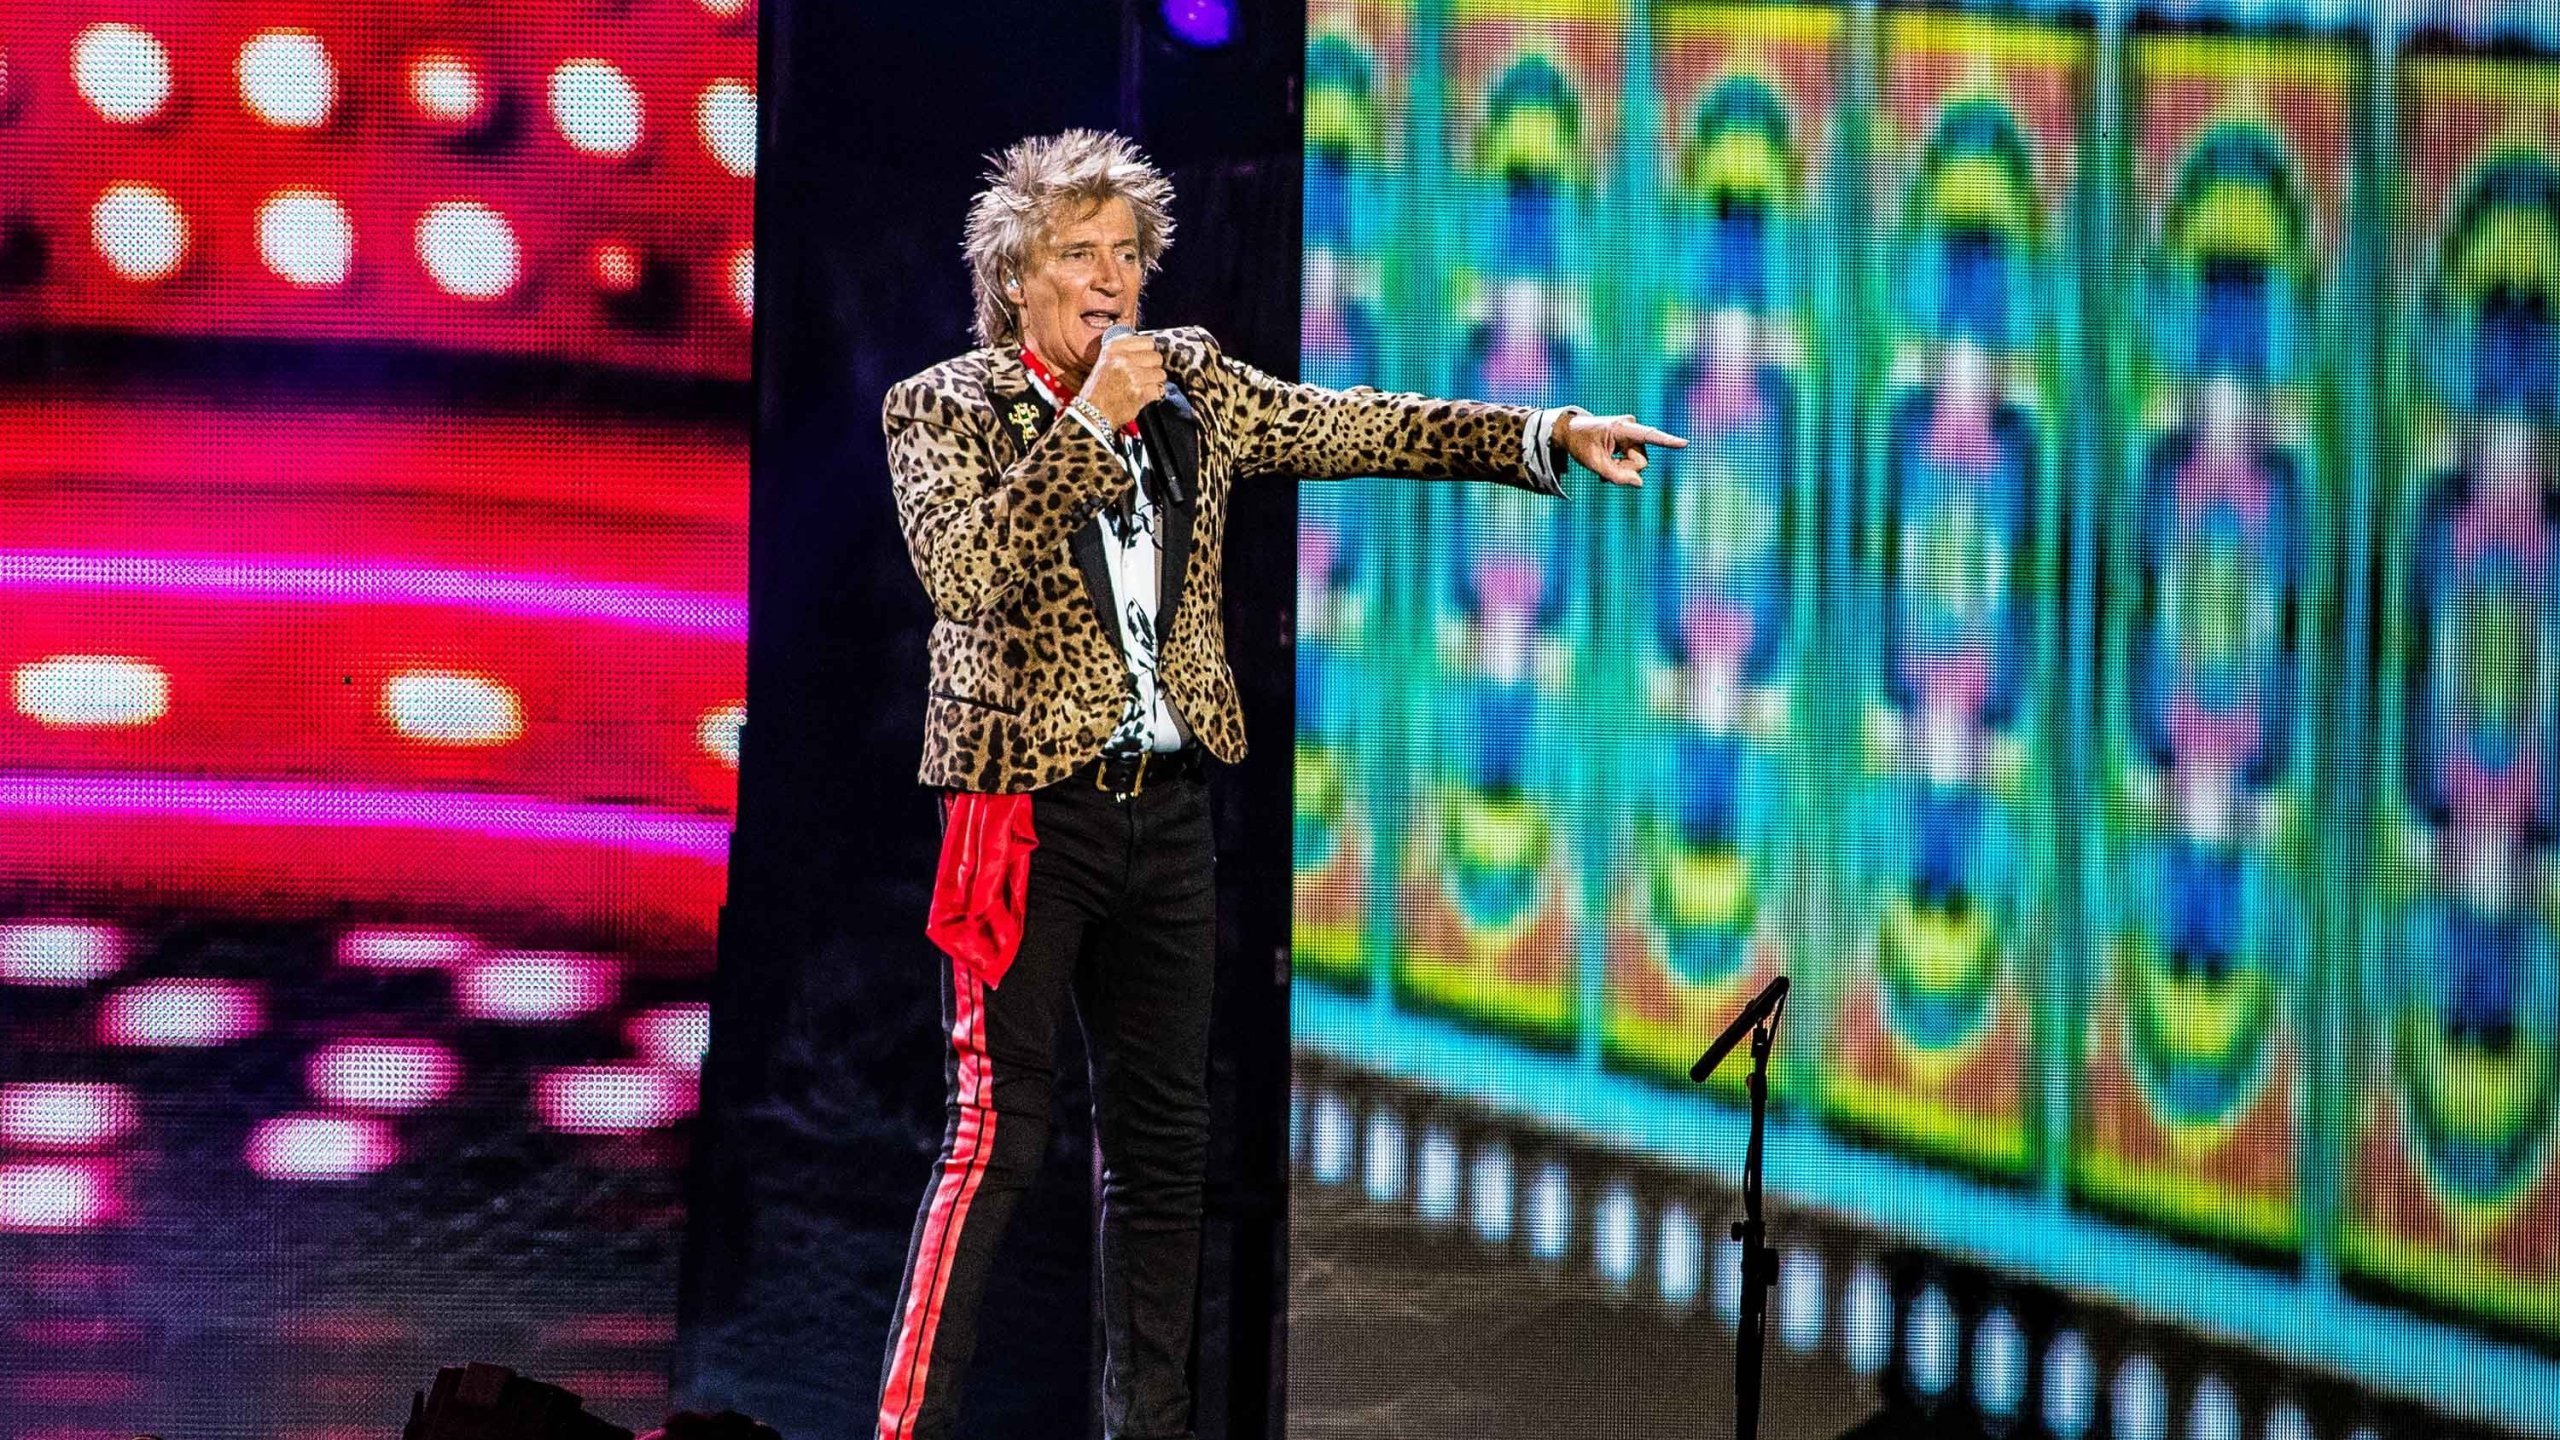 Rod Stewart speaks out about three